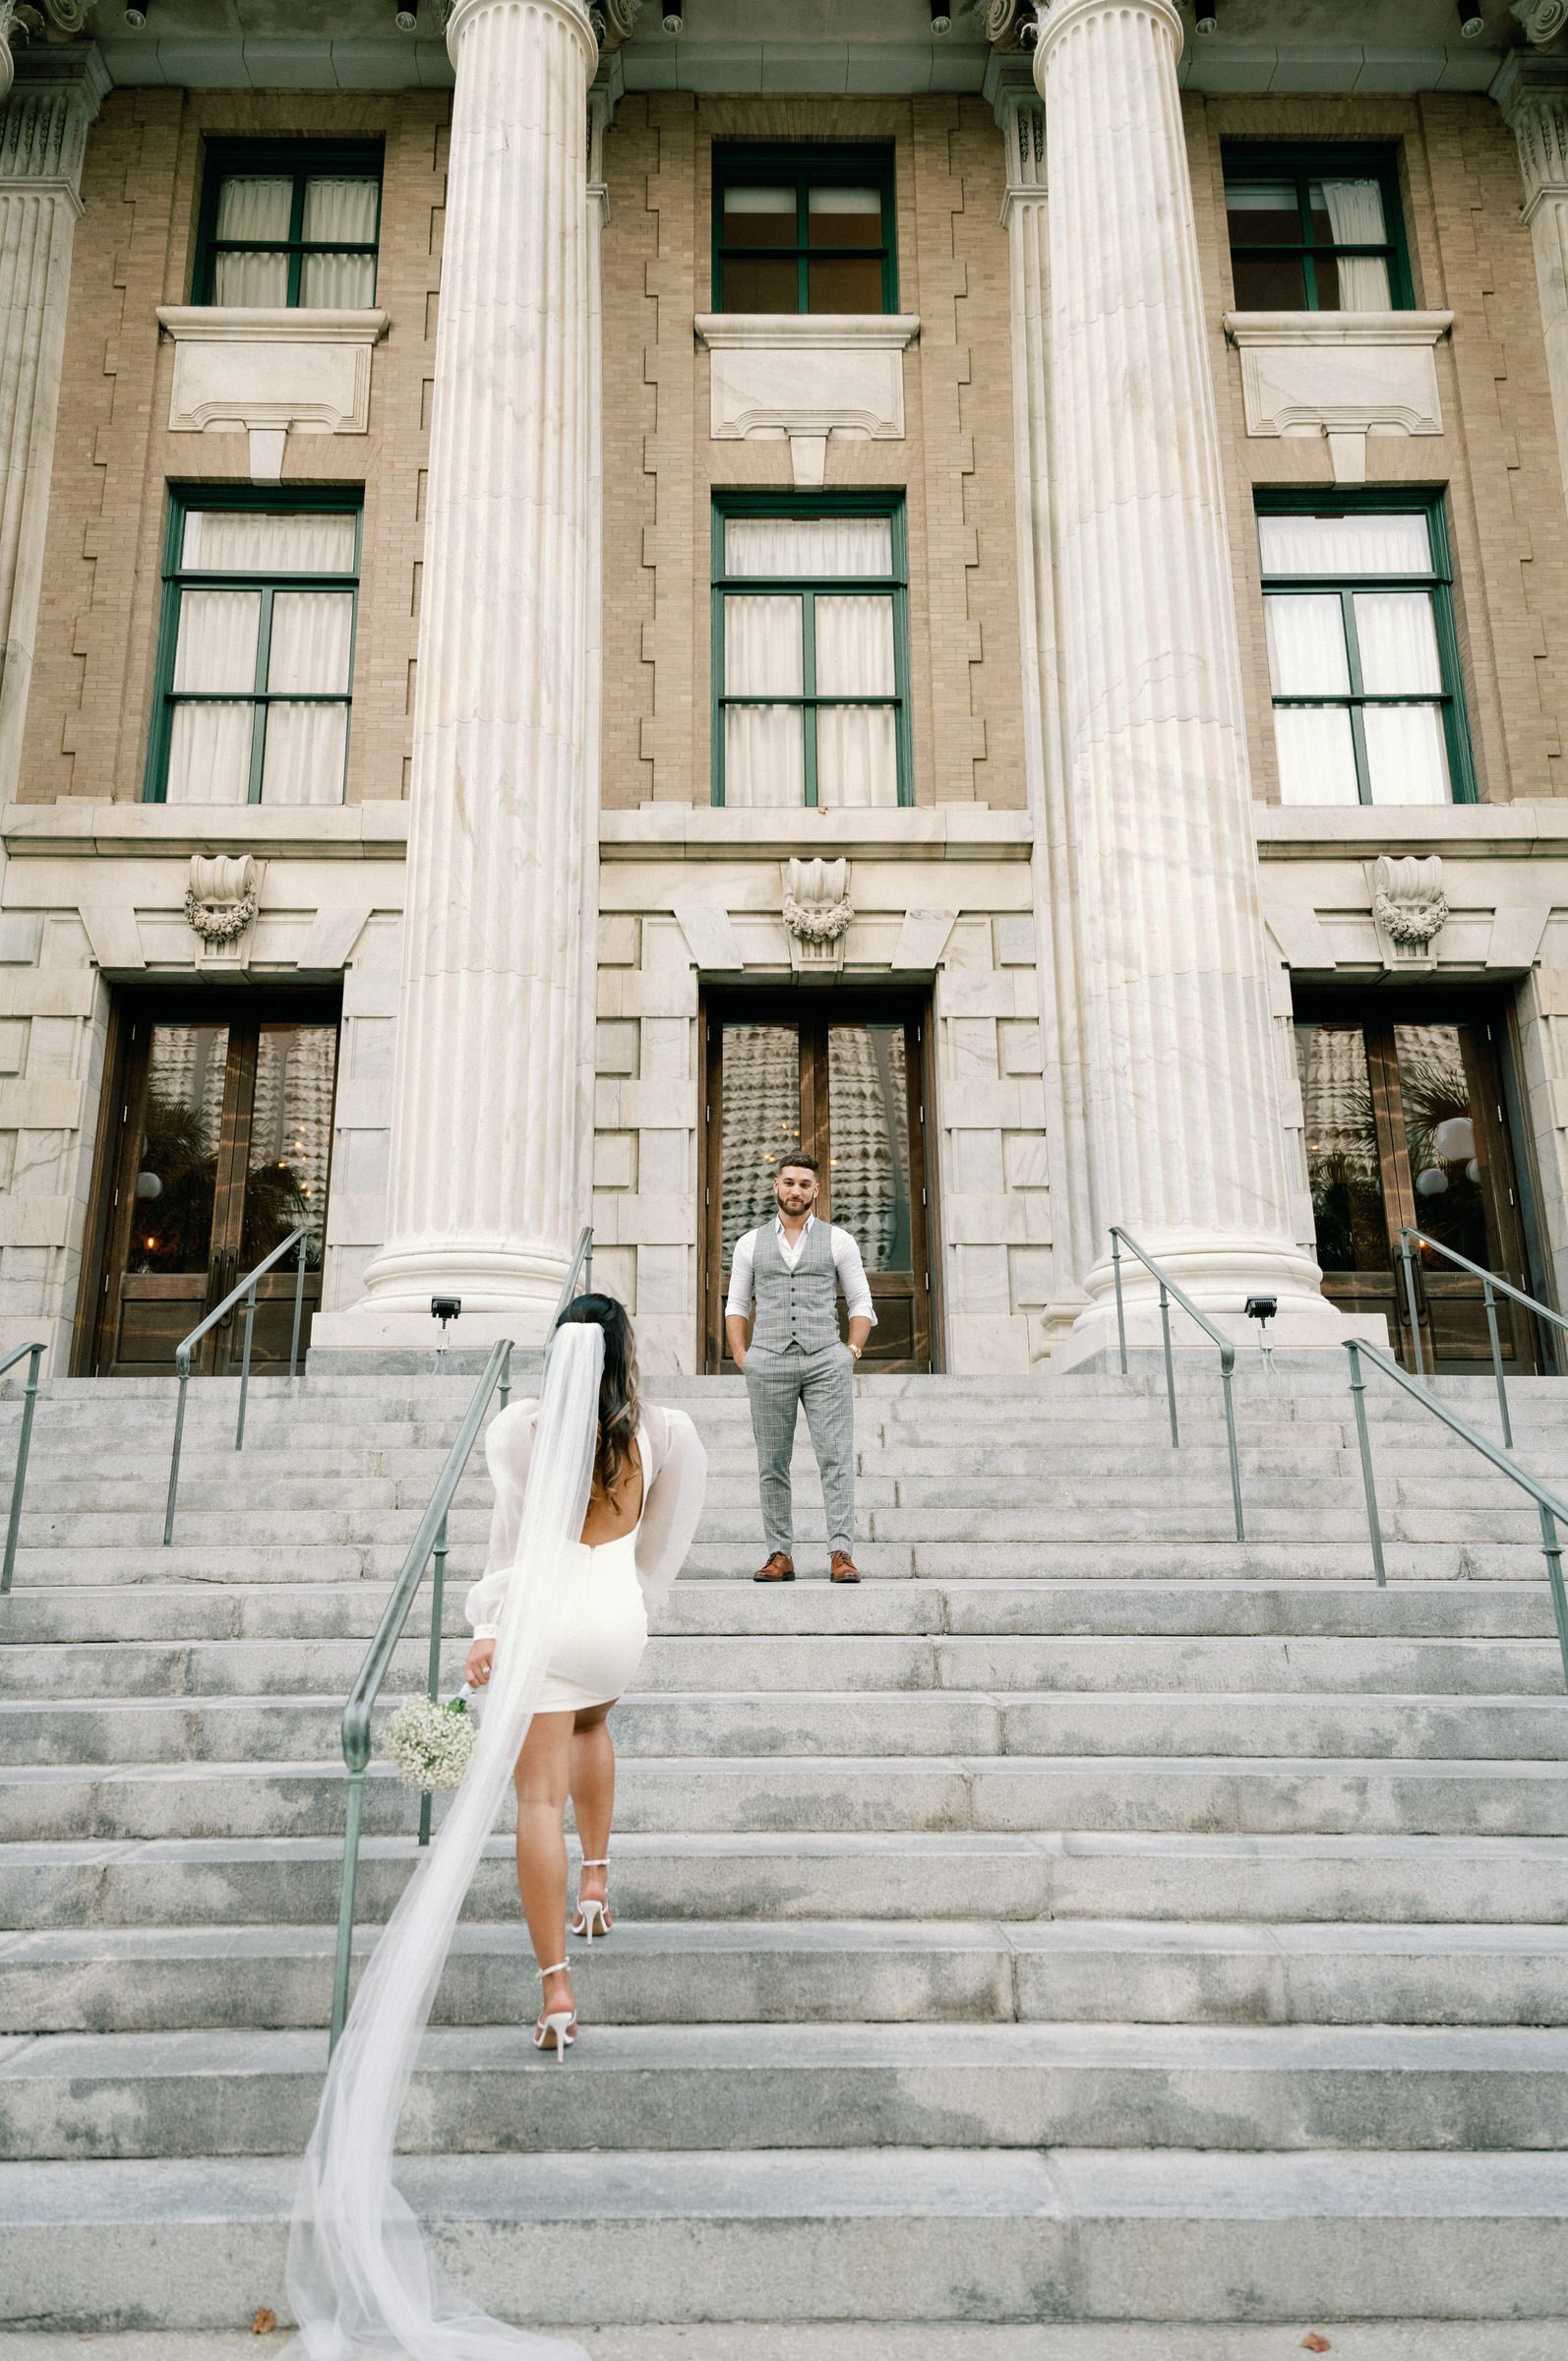 Copyright-Dewitt-for-Love-Photography-M-M-Ybor-City-Tampa-Engagement-Session-71.jpg